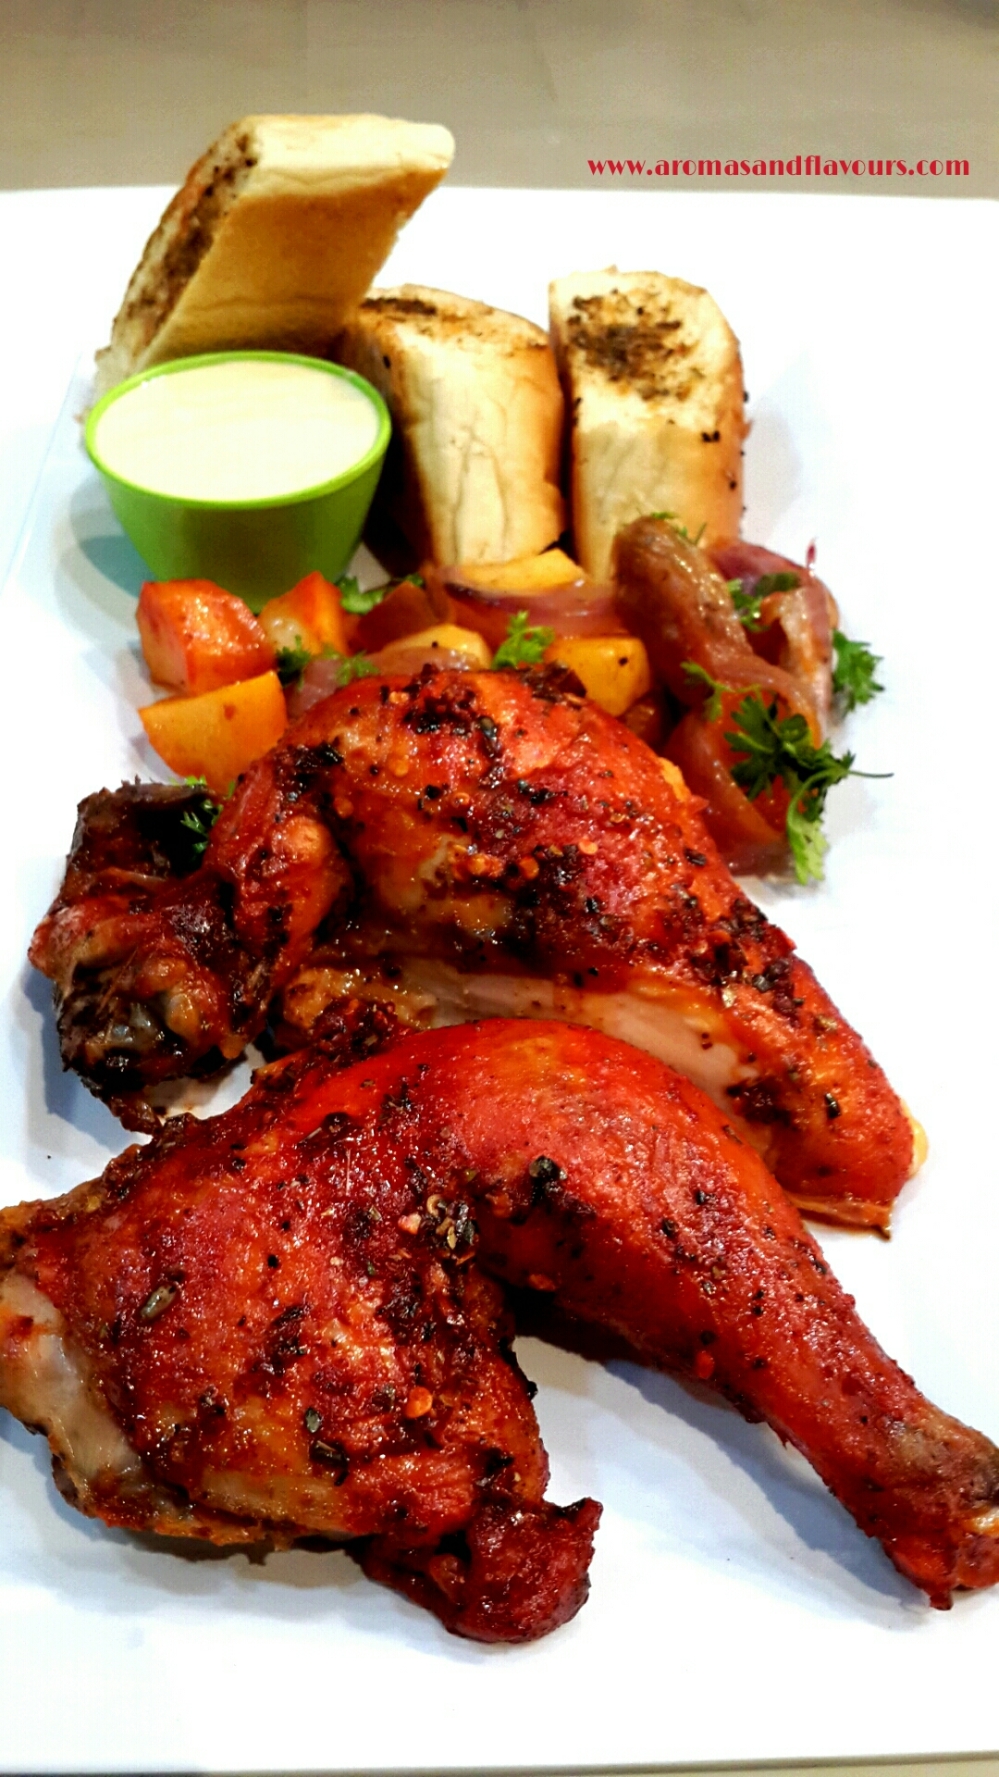 Peri Peri chicken with Musk Melon dip, roasted potatoes, caramelized onions and garlic bread